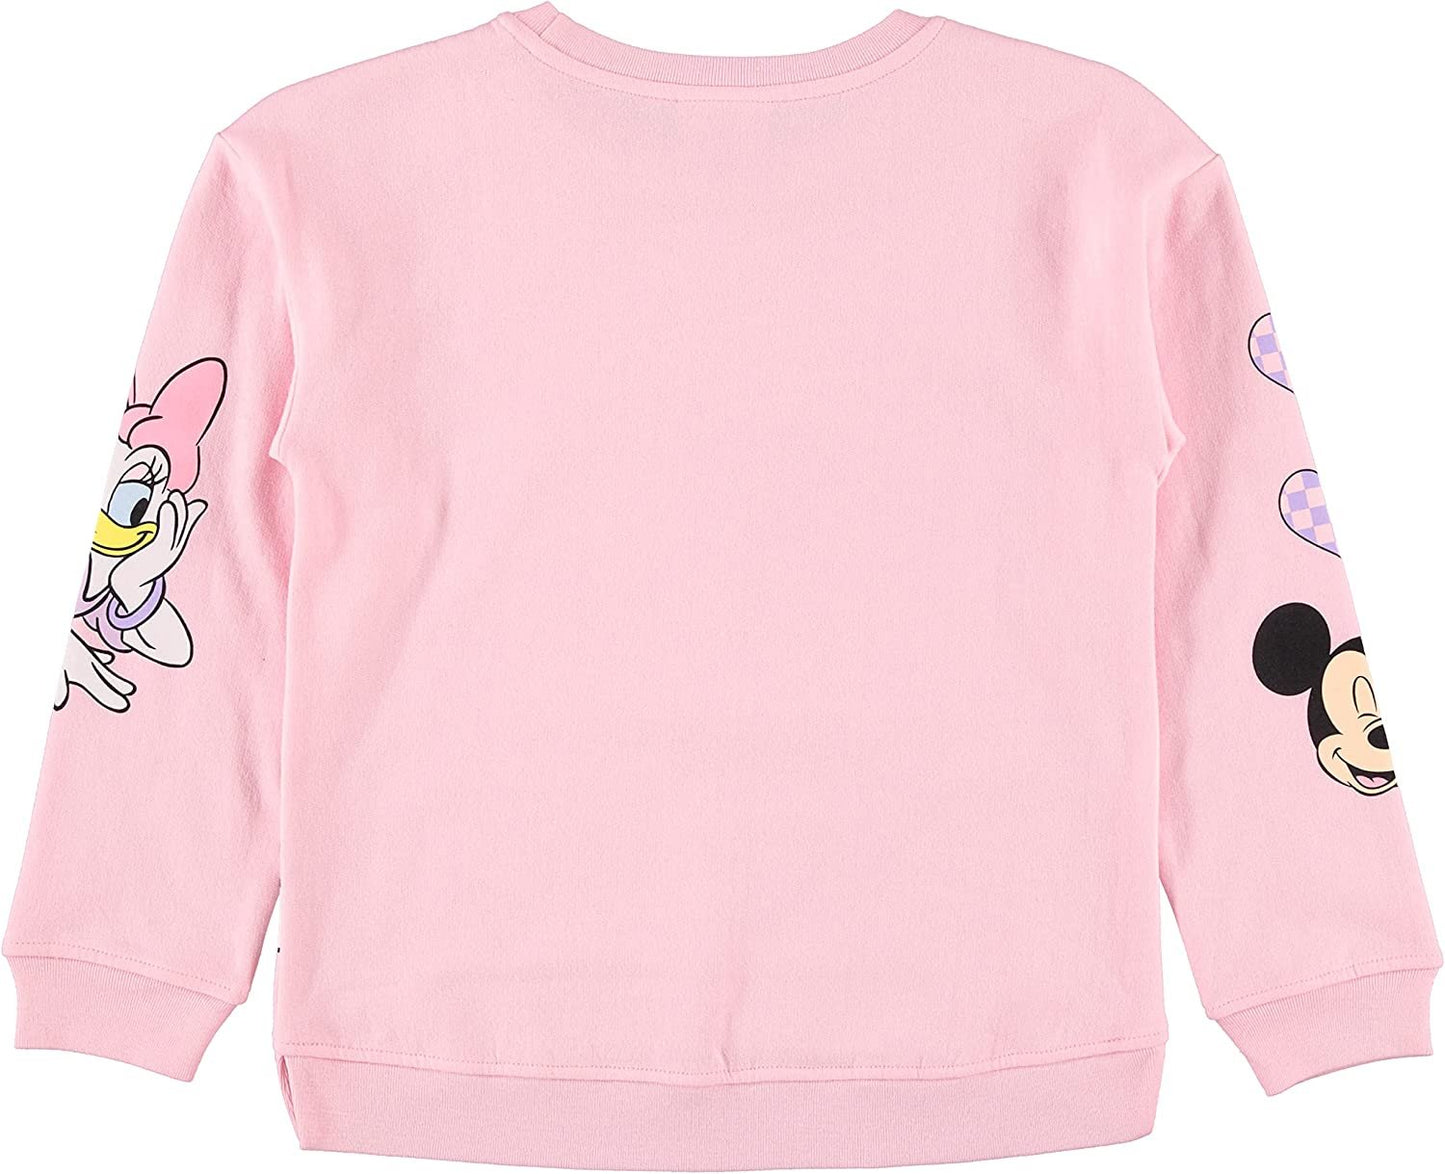 Minnie Mouse Girls Sweatshirt -Jumbo Print and Embroidery Minnie Mouse Sweater- Sizes 4-16